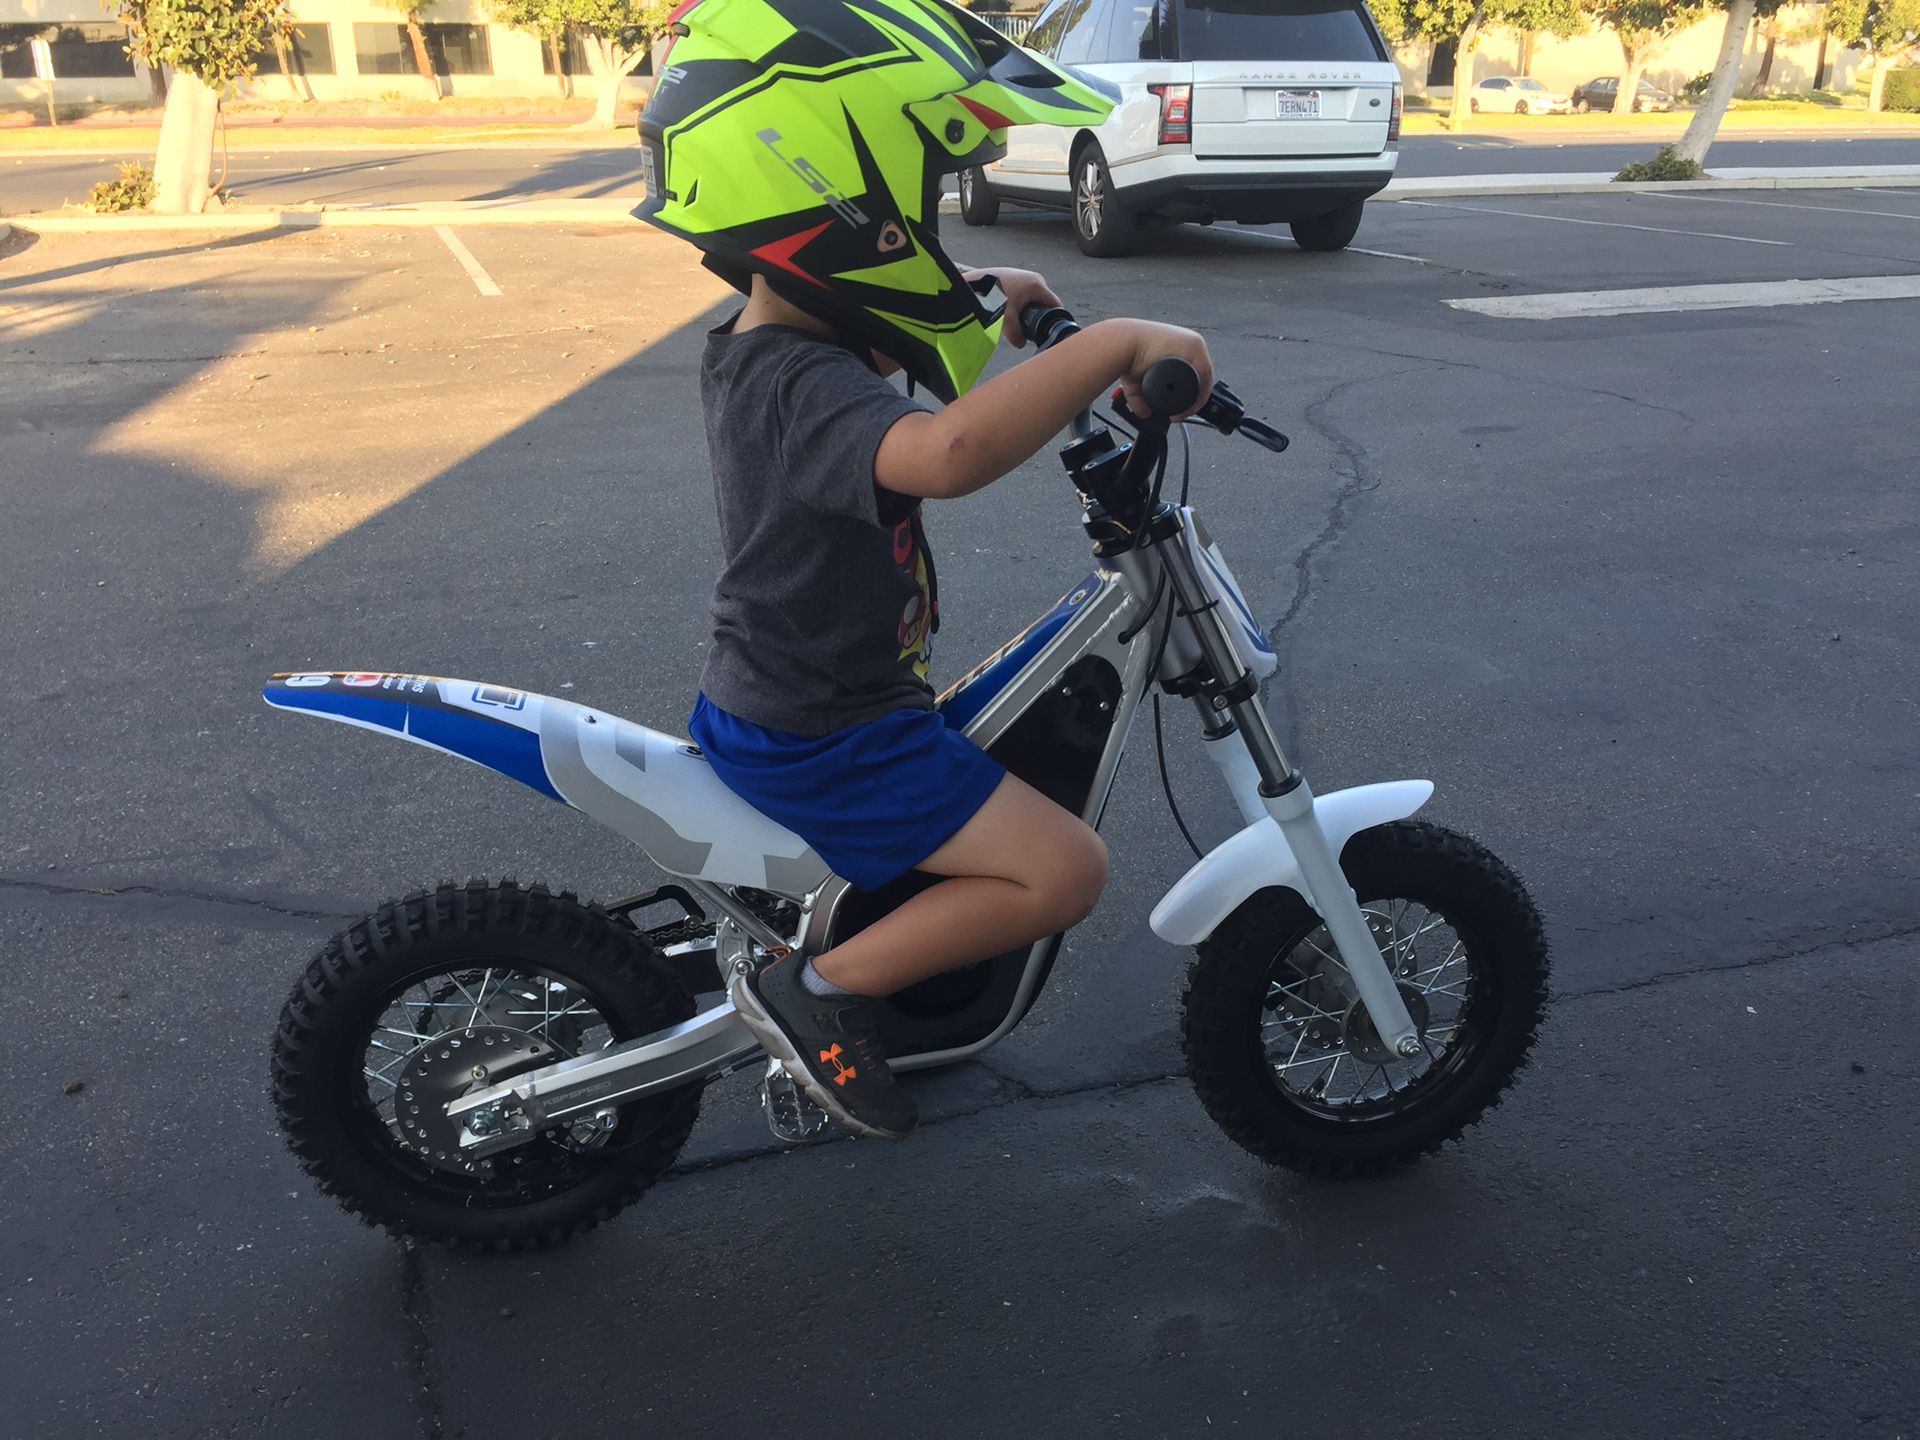 Photo Electric Trials dirt bike for kids. Dommano brand. For ages 48 years old. Brand new condition. Like the Oset 16R Beta trials bike